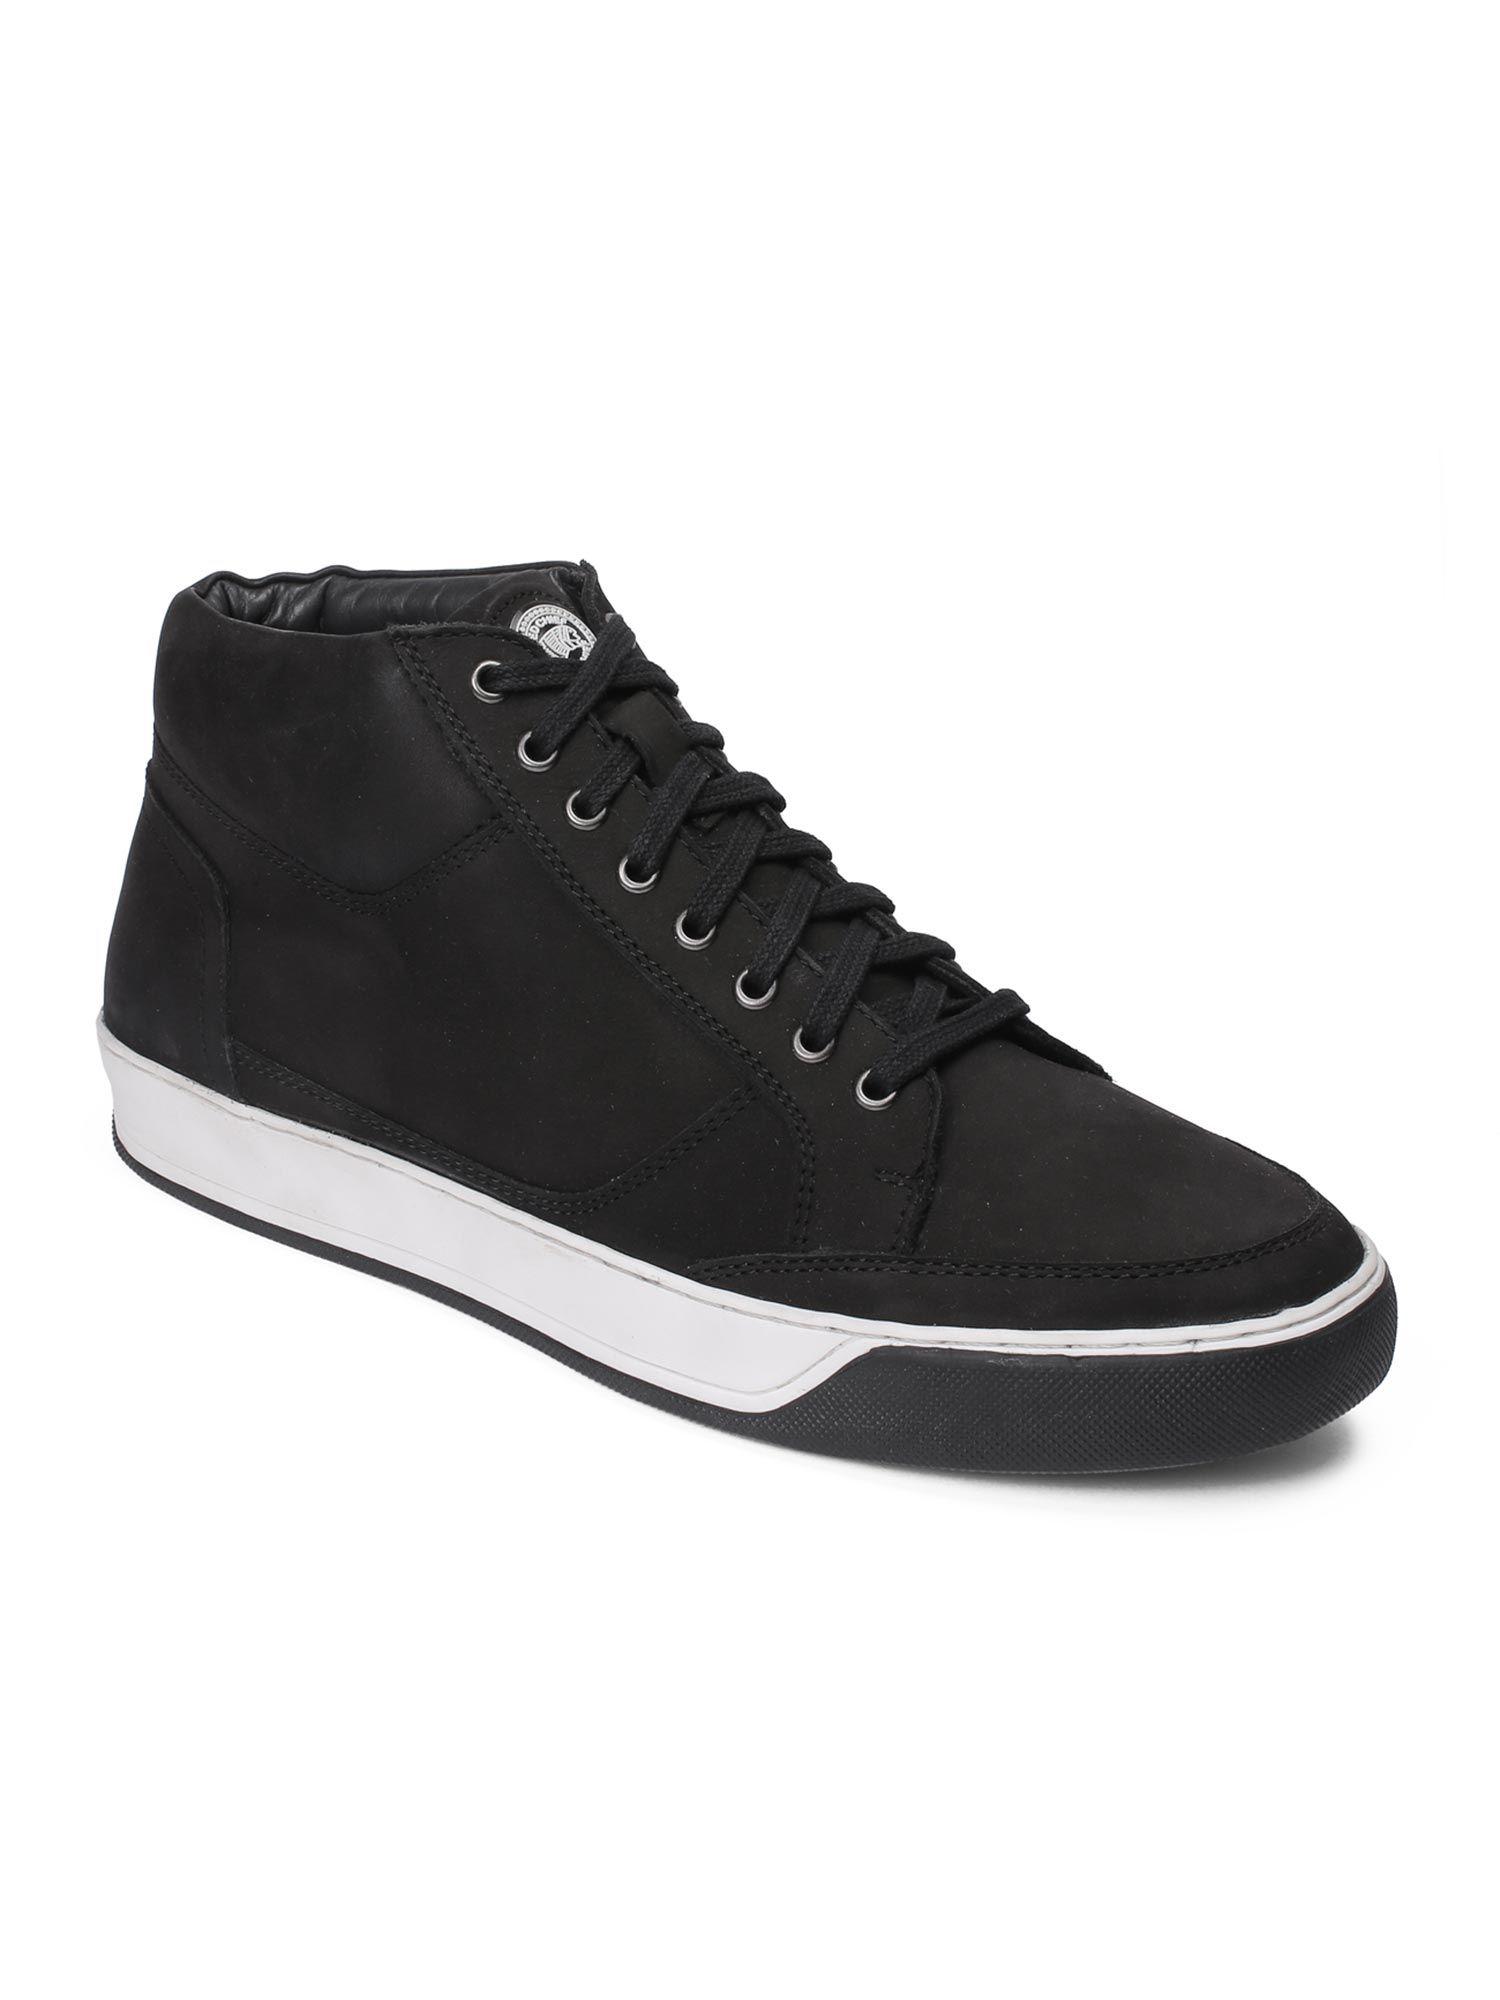 black-leather-sneaker-shoes